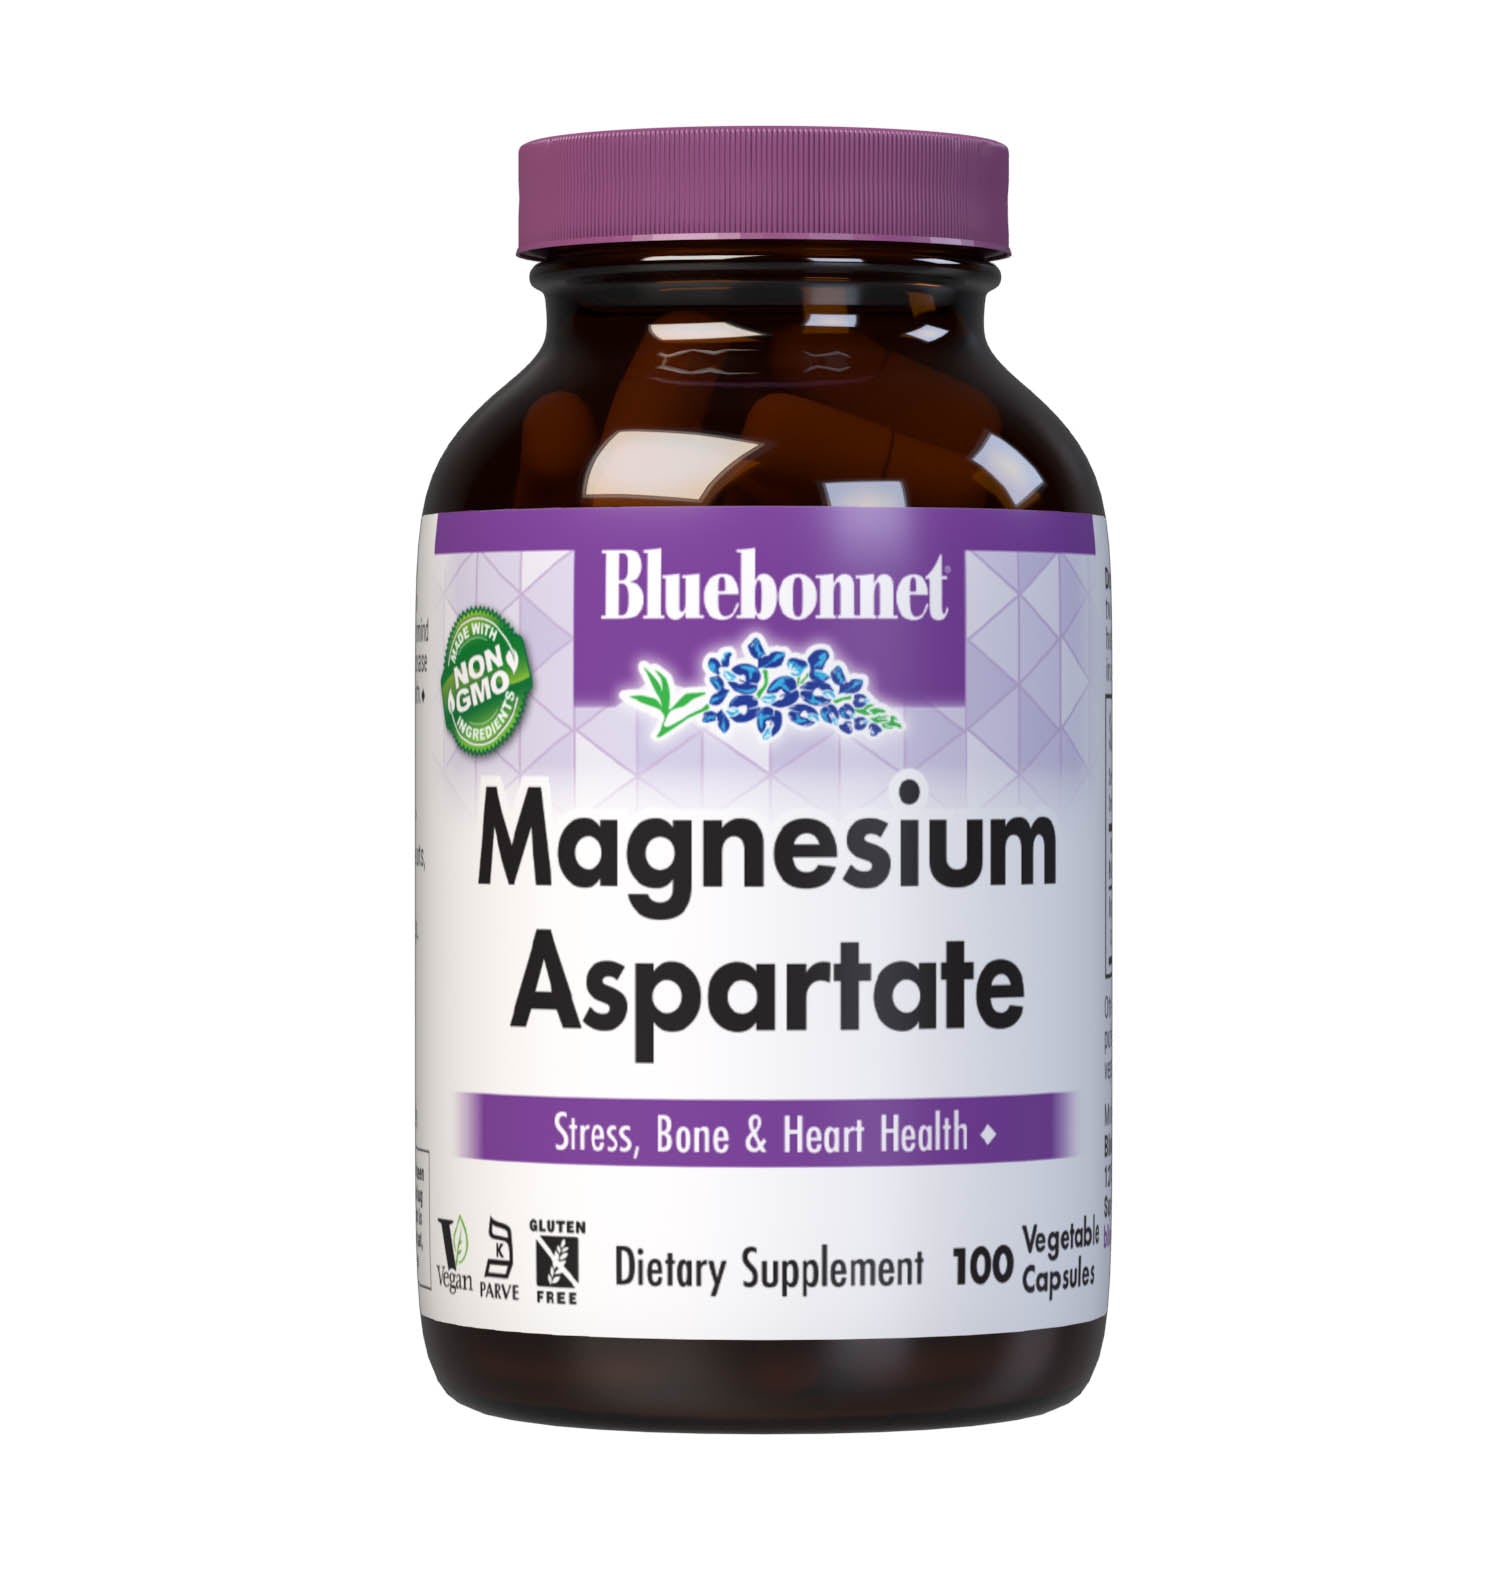 Bluebonnet's Magnesium Aspartate 100 Vegetable Capsules are formulated with magnesium from a chelate of magnesium aspartate. Magnesium is required in over 300 biochemical reactions in the body but is primarily known to calm the mind and body, reduce stress, induce restful sleep, increase bone density, as well as support immune and cardiovascular health. #size_100 count